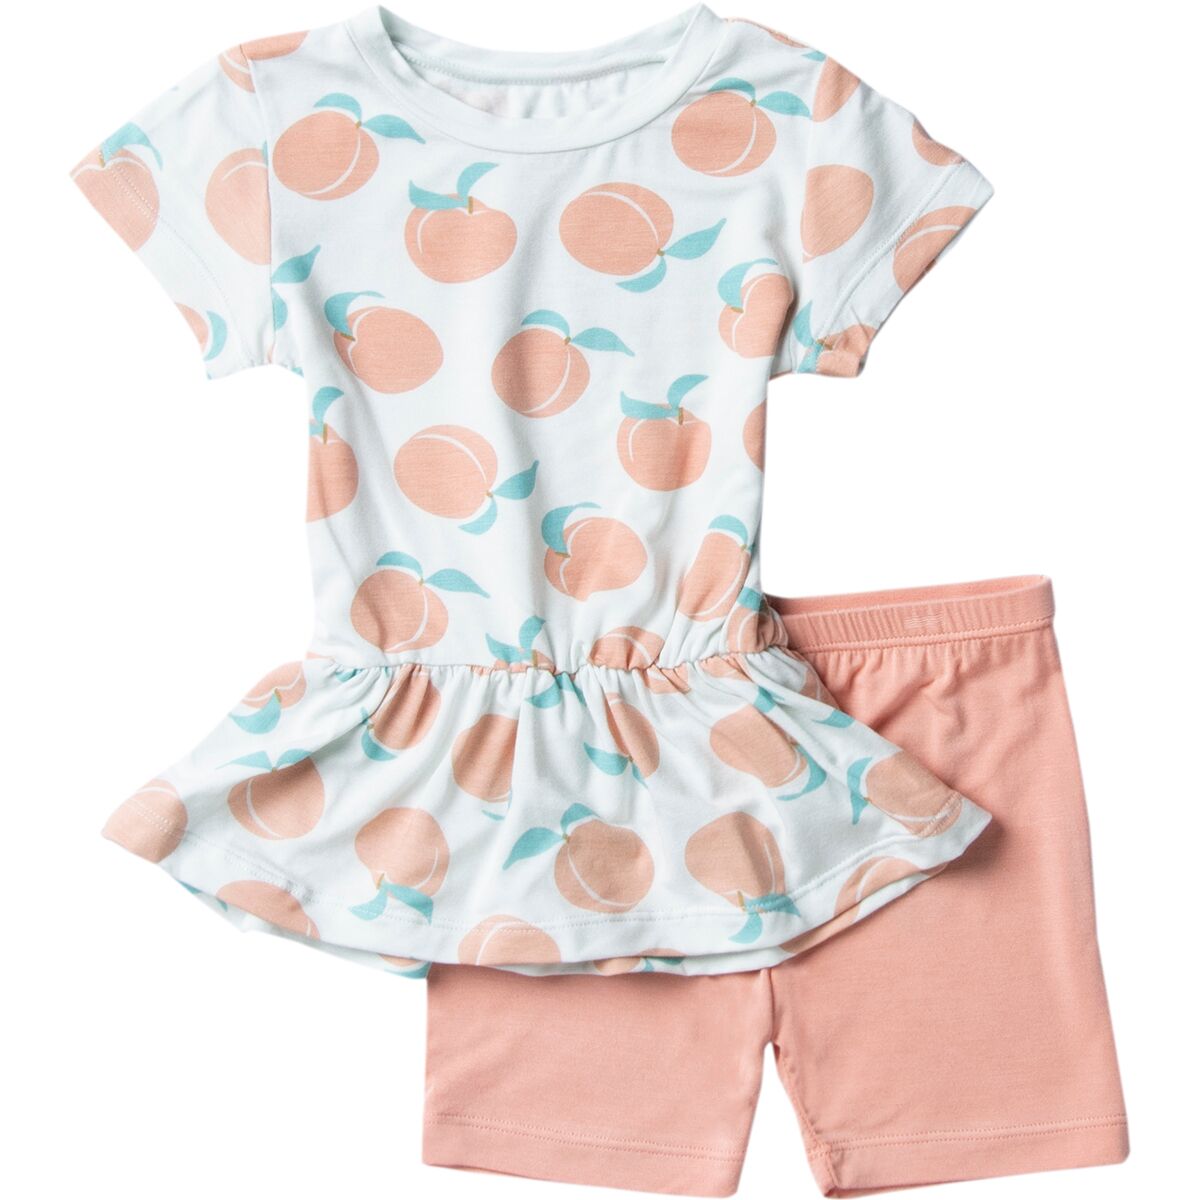 Kickee Pants Short-Sleeve Playtime Outfit Set - Infants'